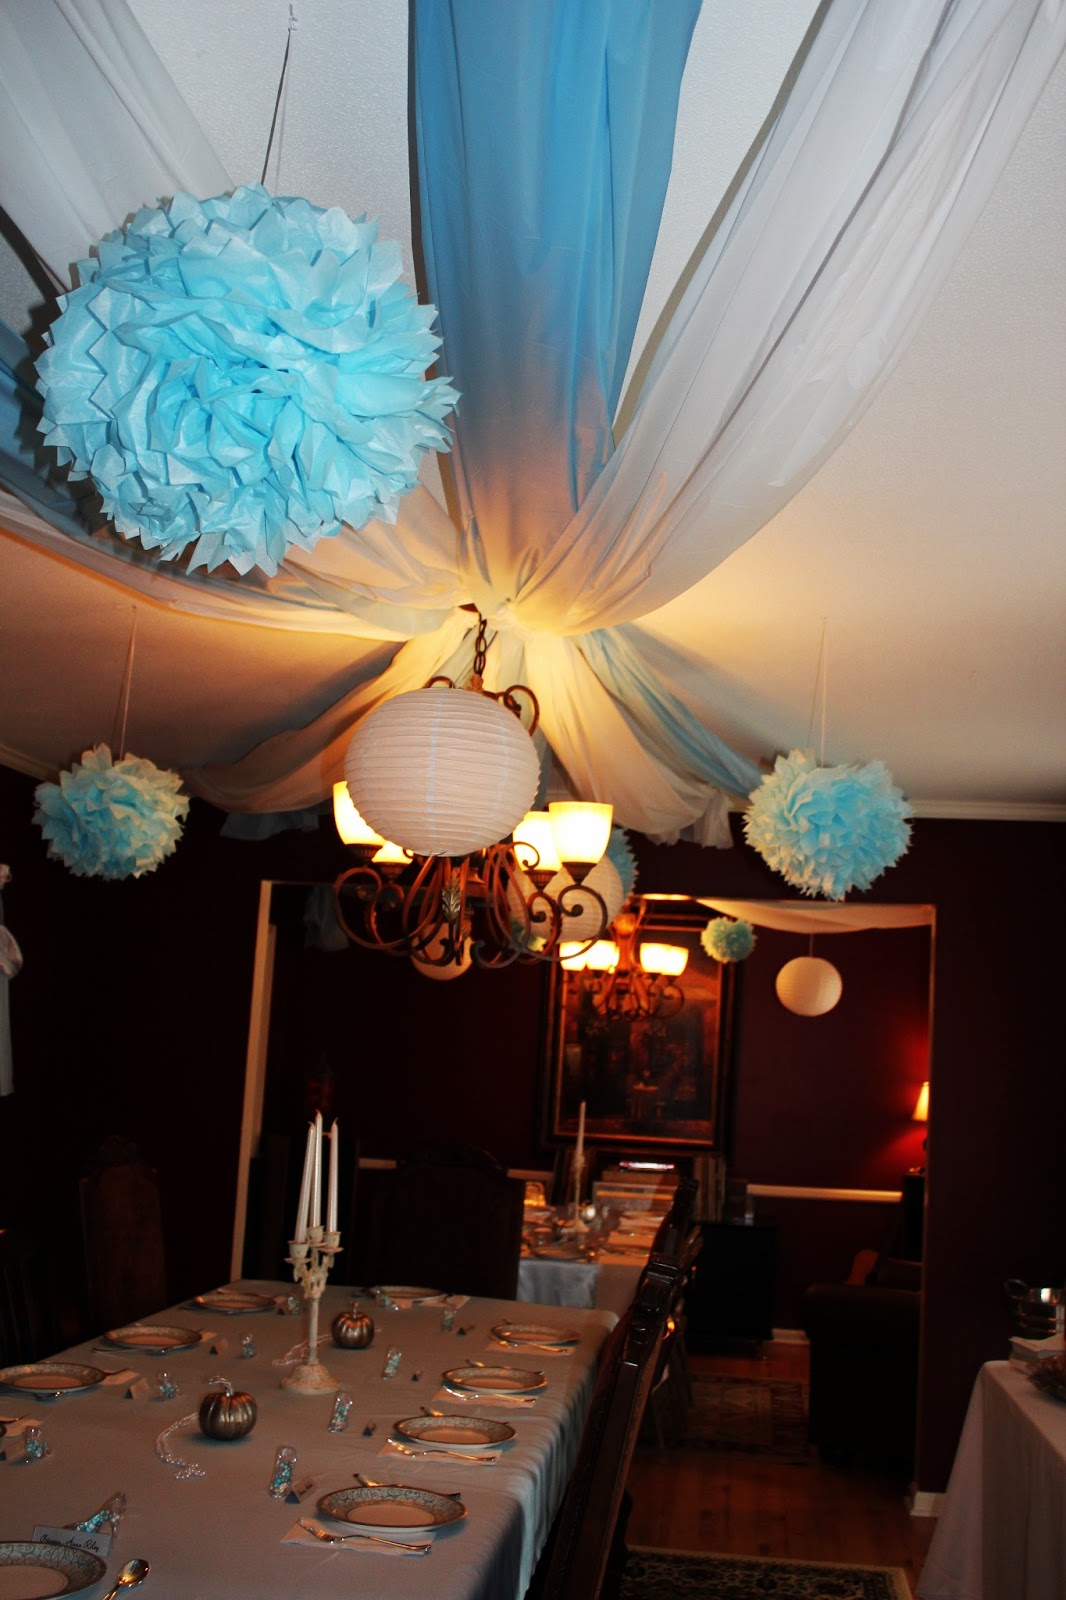 ... the dollar tree on the ceiling. I hung lanterns and tissue balls also